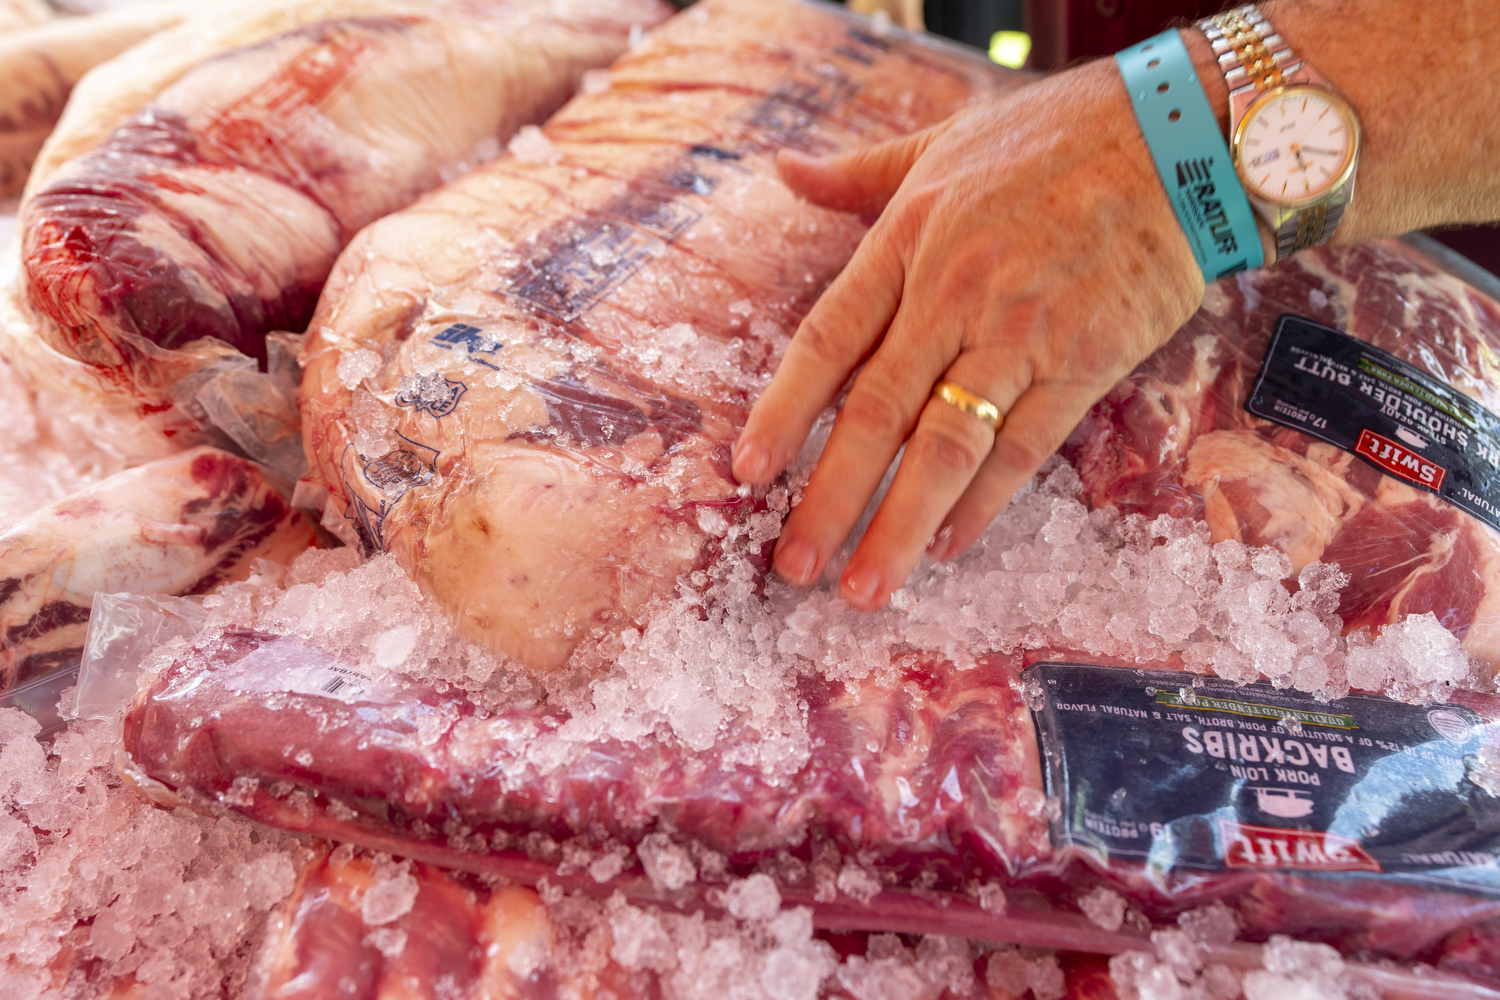 Raw cuts of meat are kept under ice during the Troubadour Festival